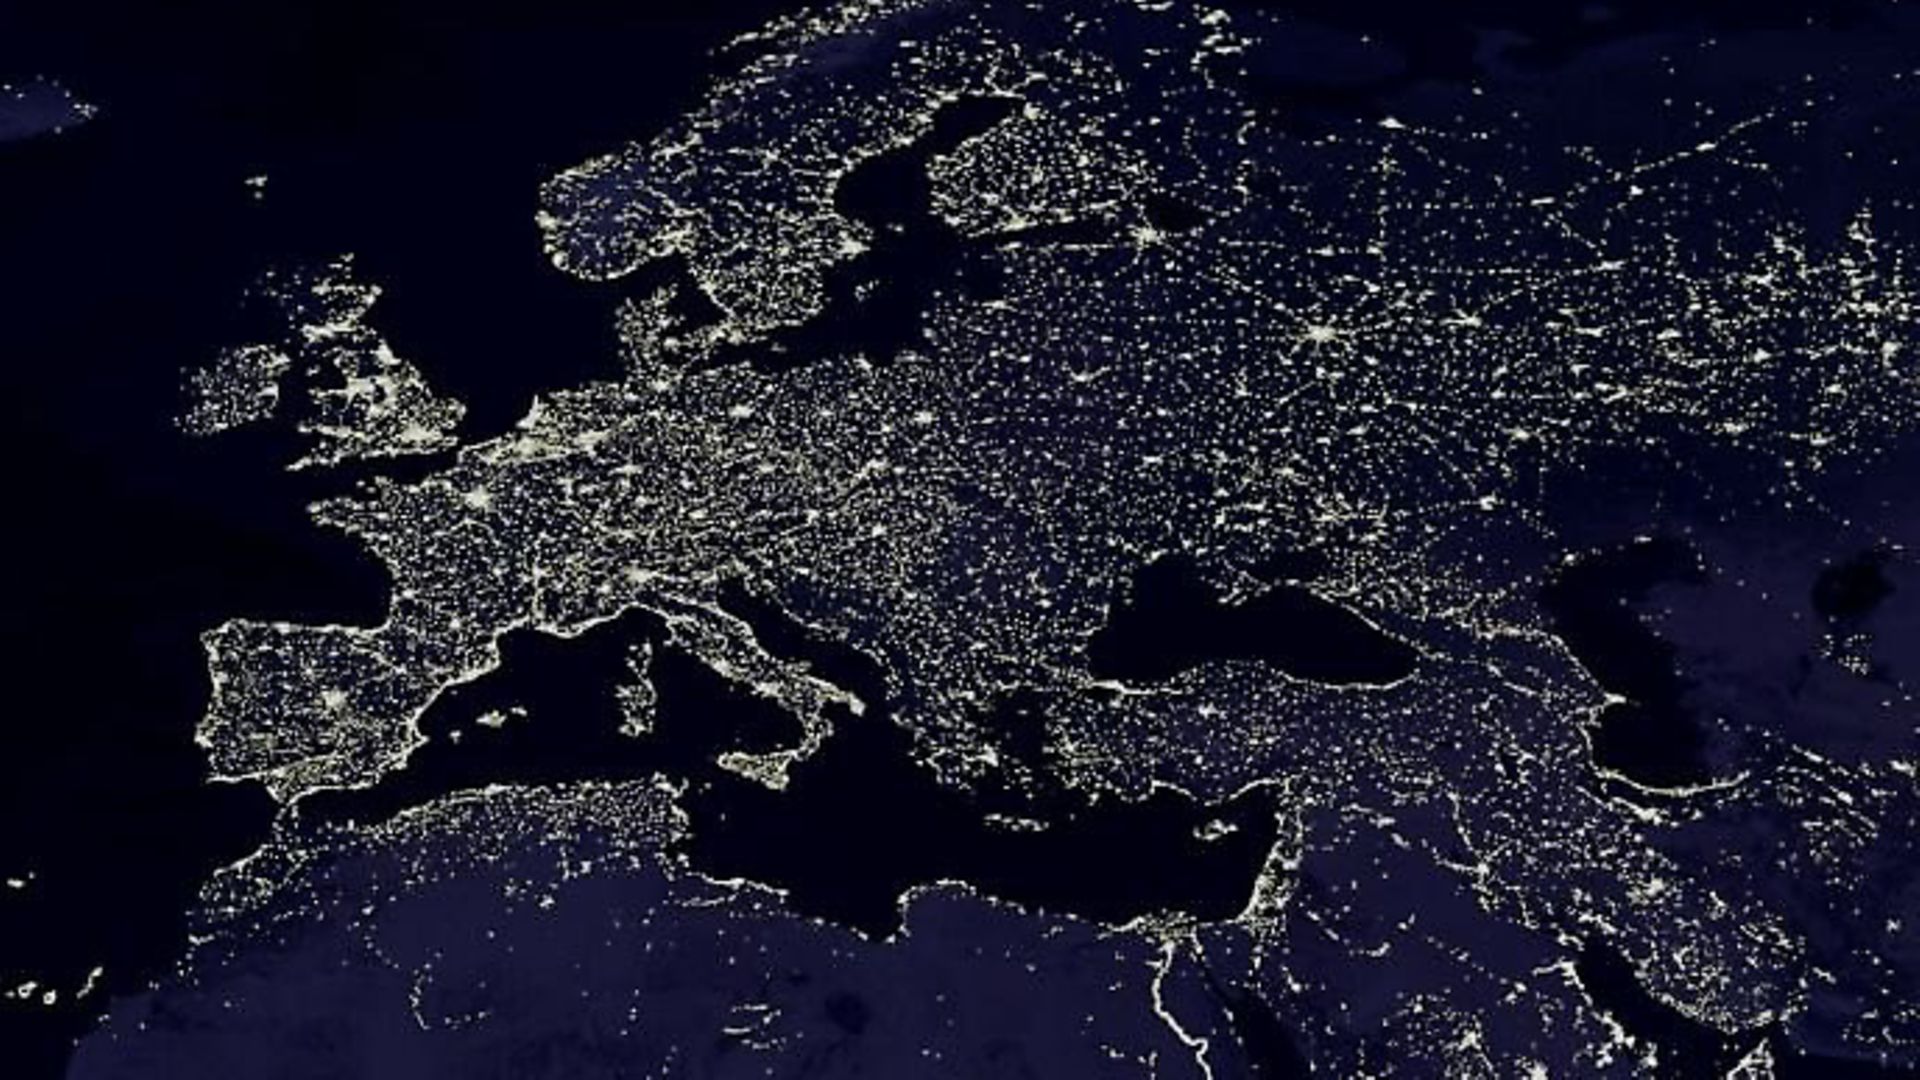 The night lights of Europe (as seen from space). Photograph: NASA/GSFC/Flickr. - Credit: Archant